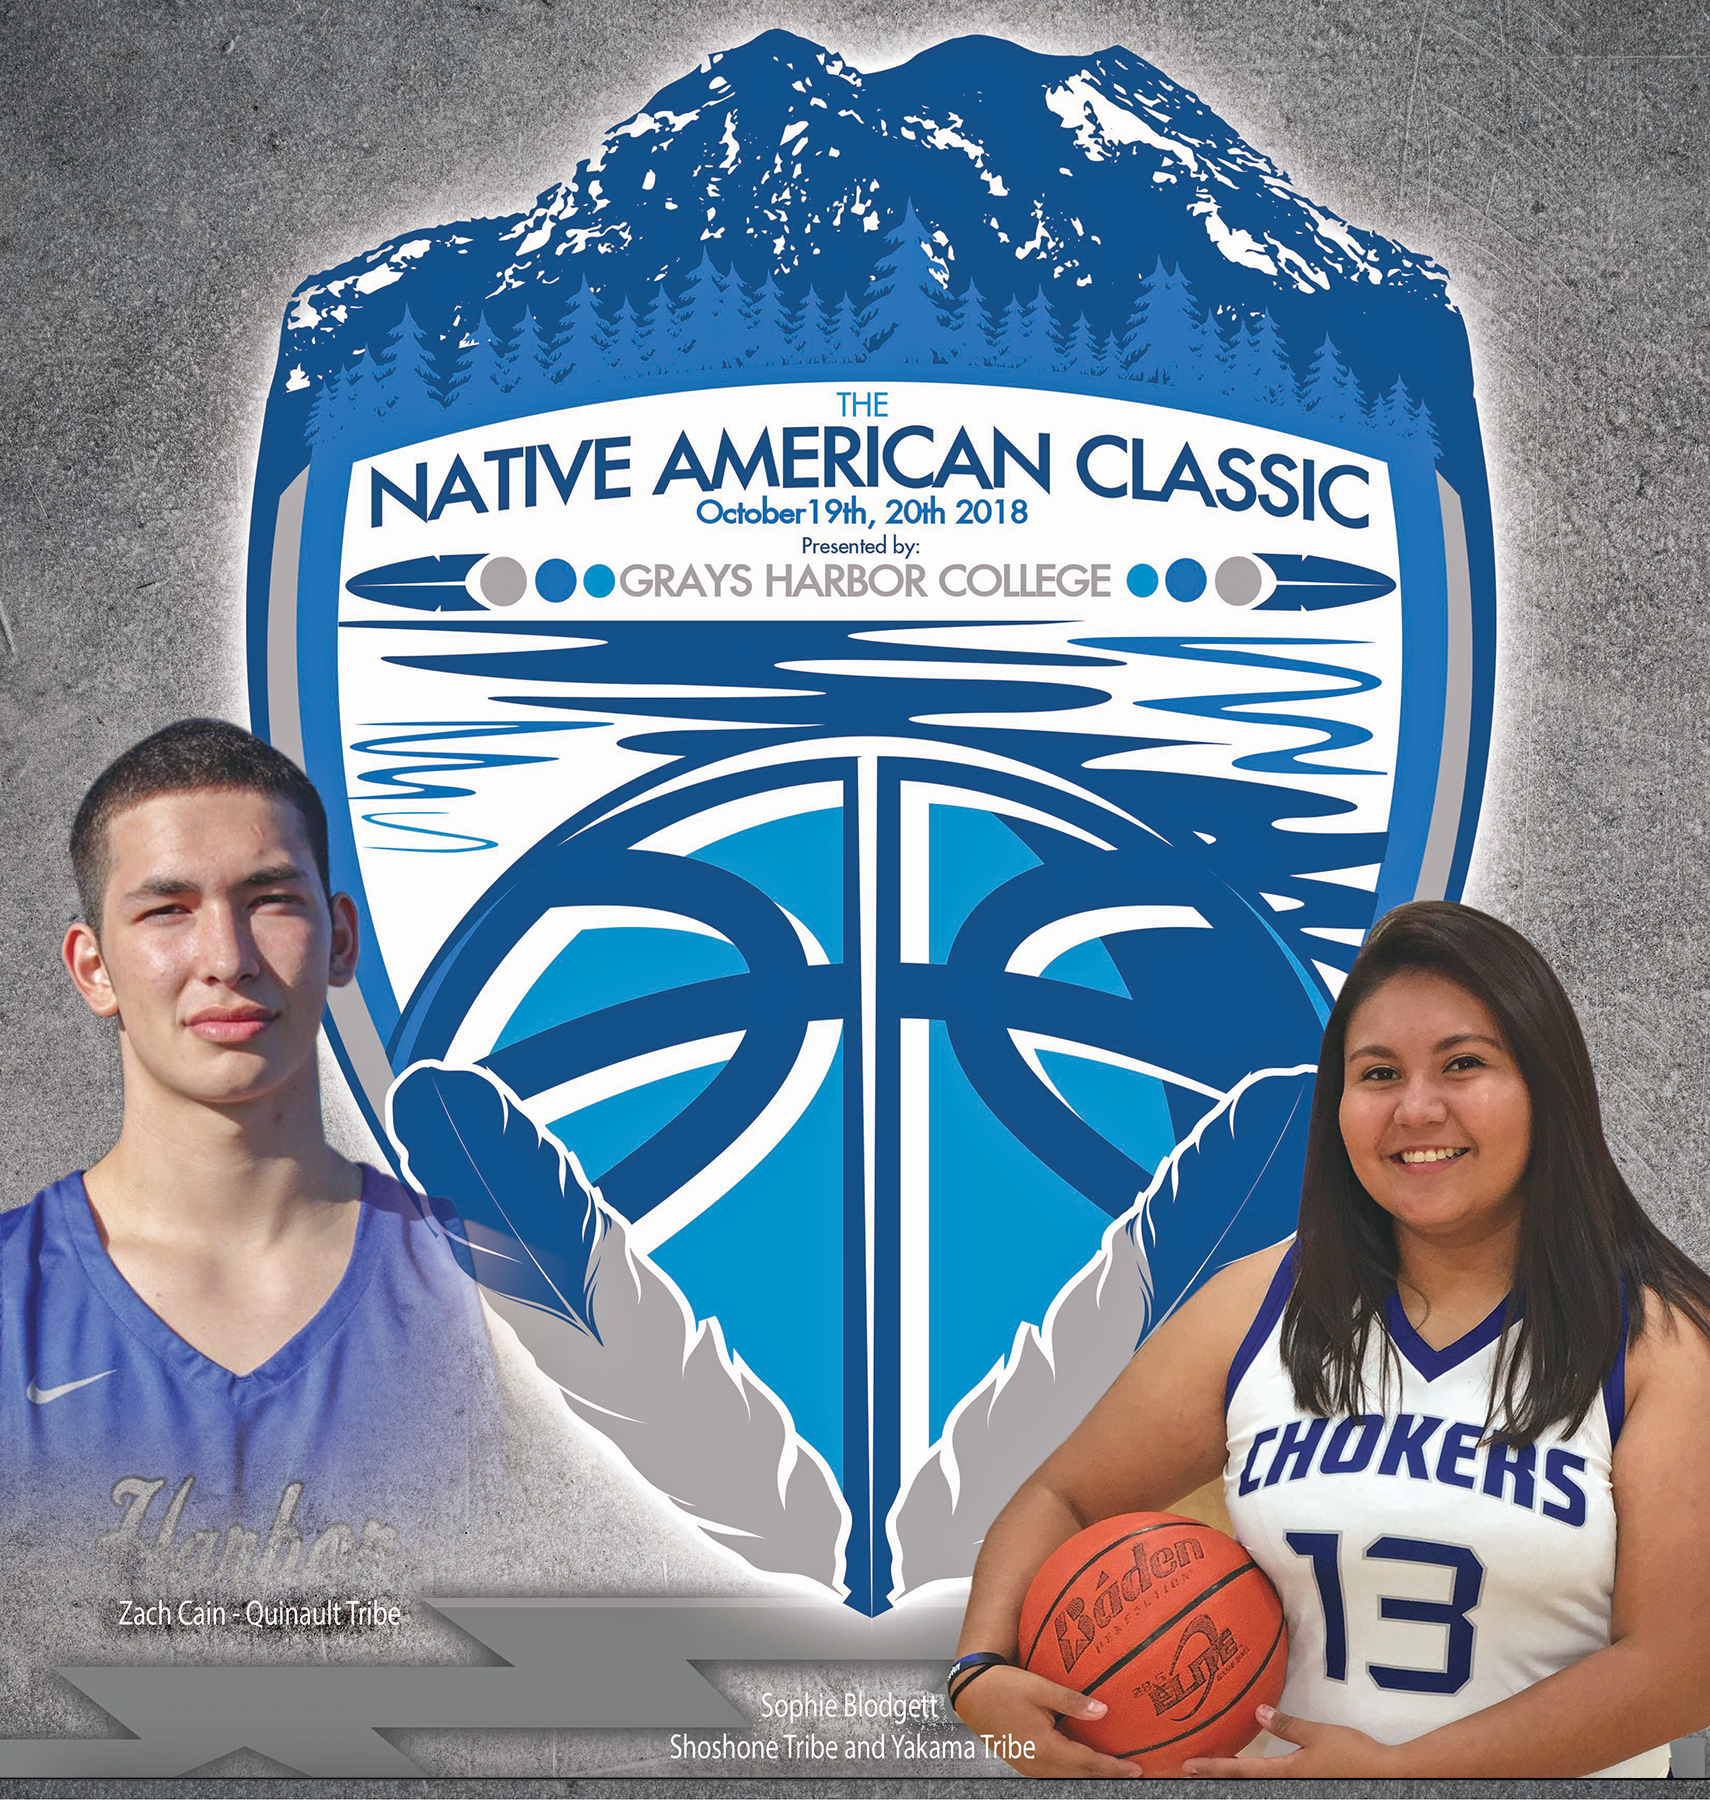 Zach Cain, Quinault Tribe and Sophie Blodgett, Shoshone and Yakama Tribe are two of the athletes that will participate in the Native American Classic